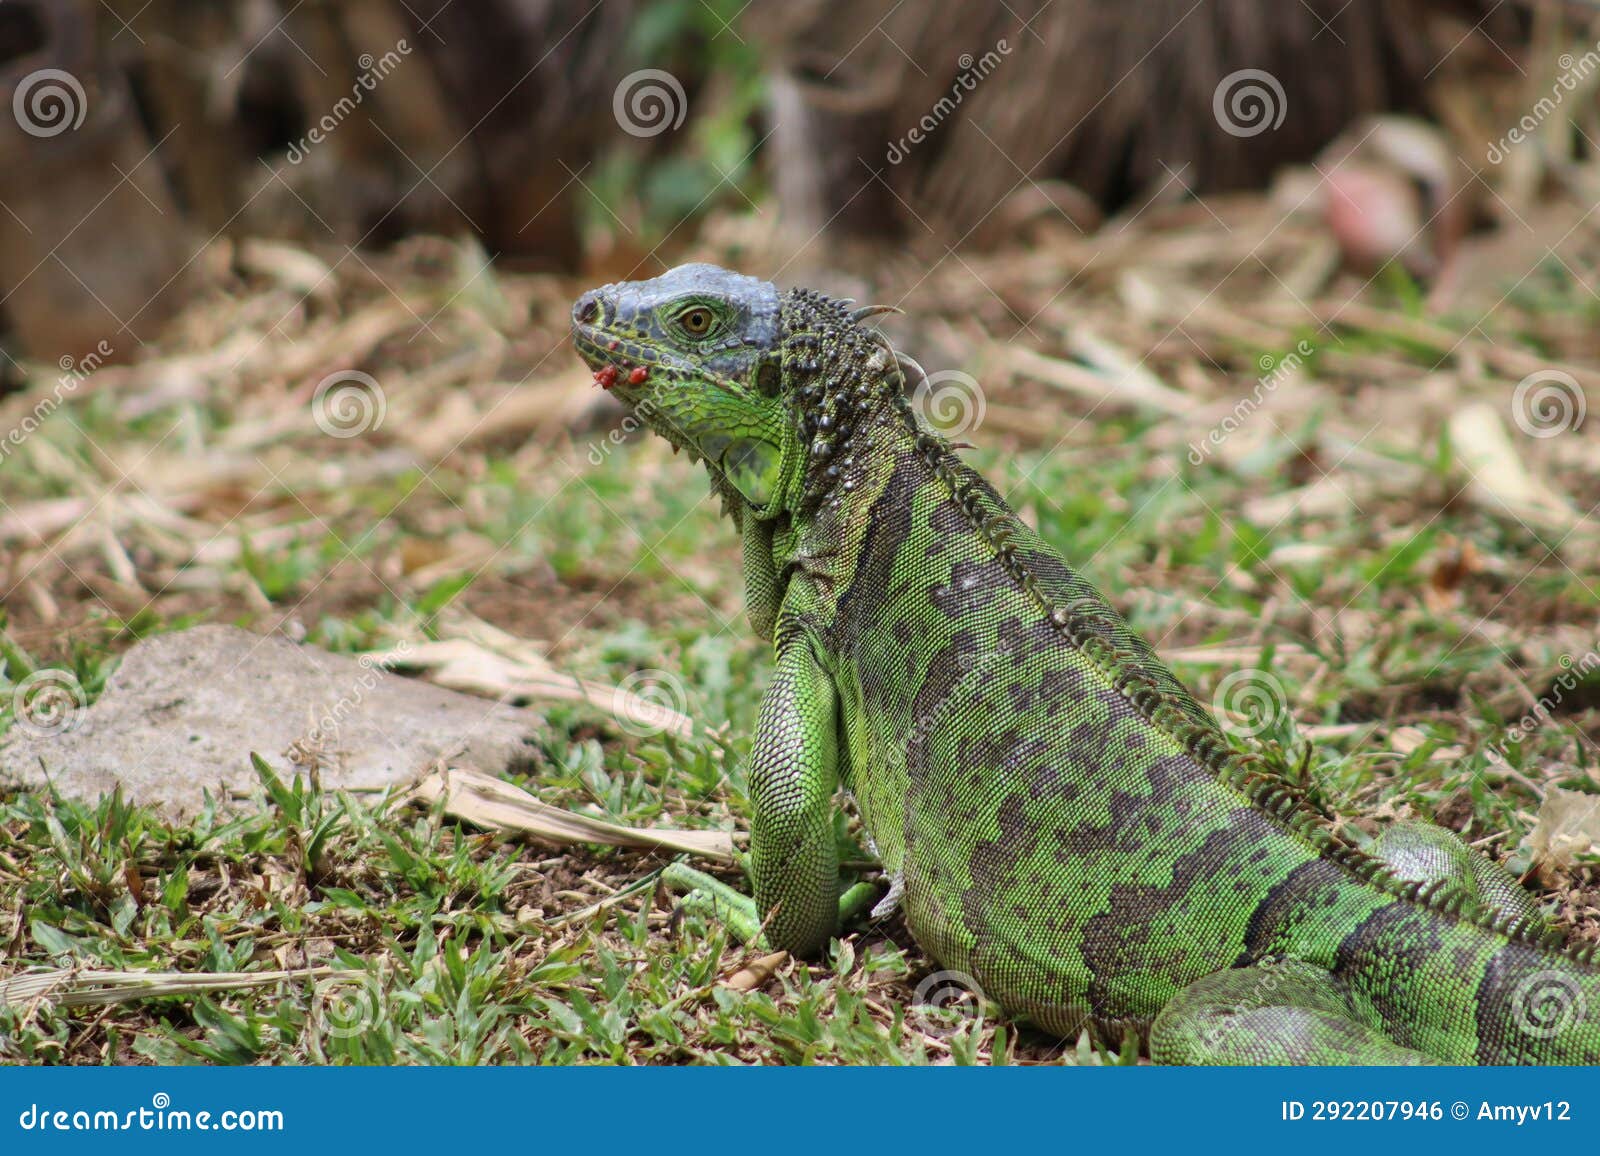 cute green iguana, with his last meal still left of his lips!